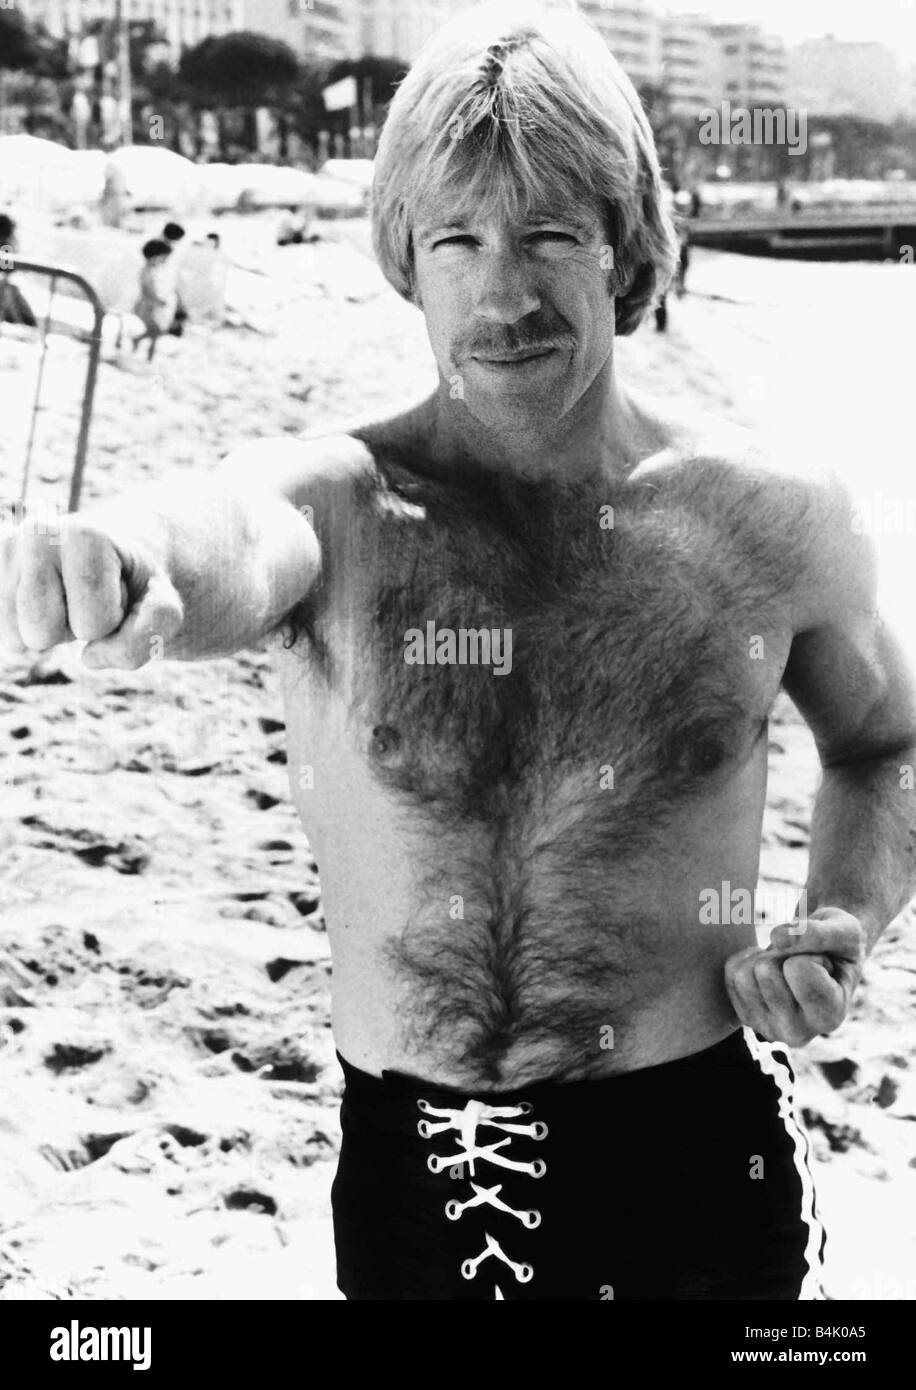 Chuck Norris Actor American Karate Champion May 1980 Dbase Stock Photo